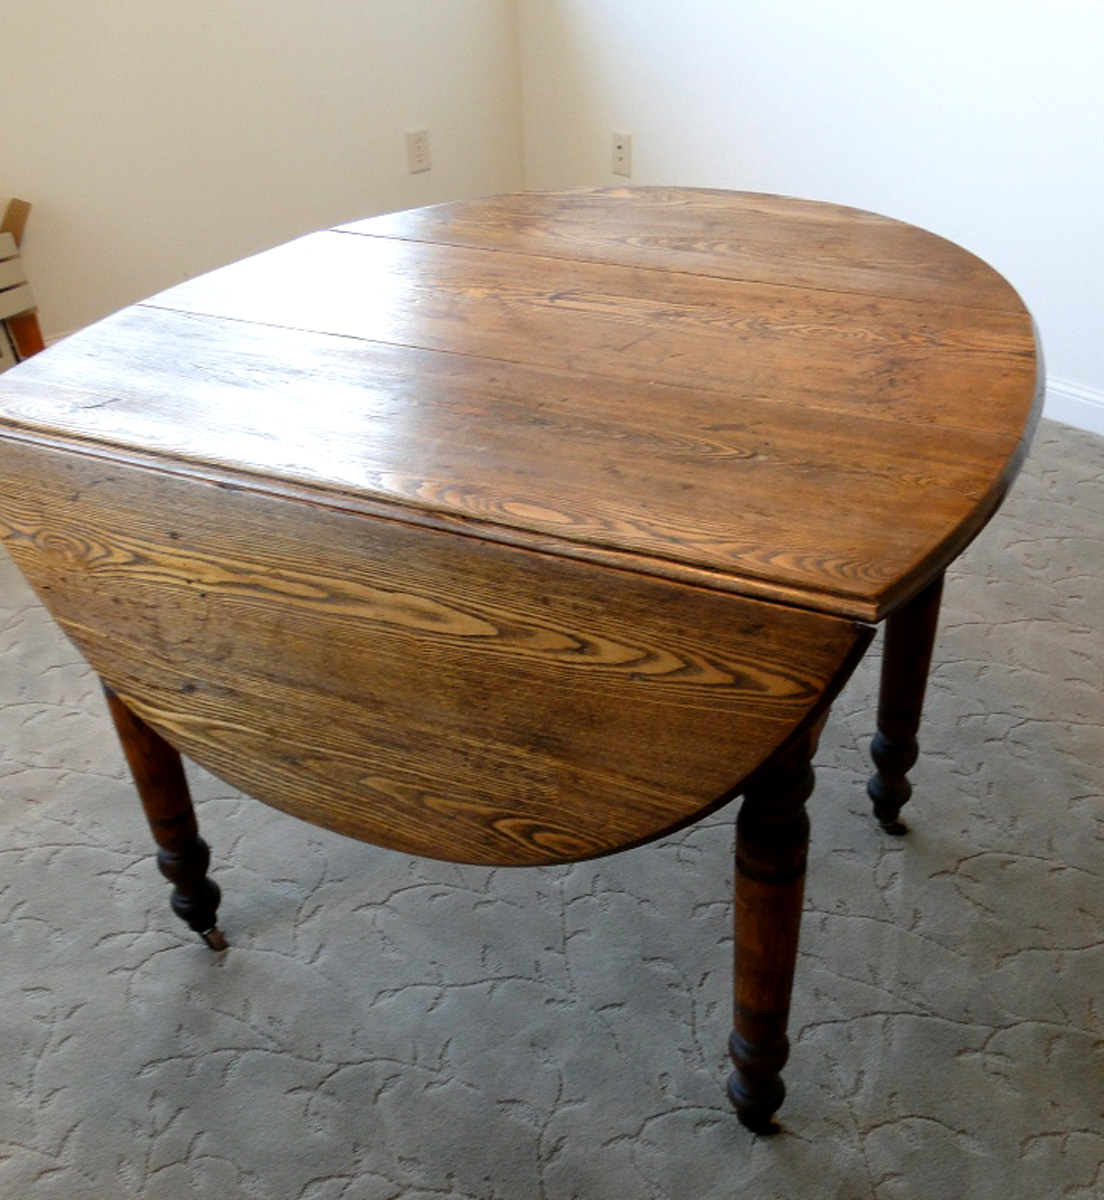 The Extension Table From Ancient Rome, Walter Of Wabash Dining Room Table And Hutch